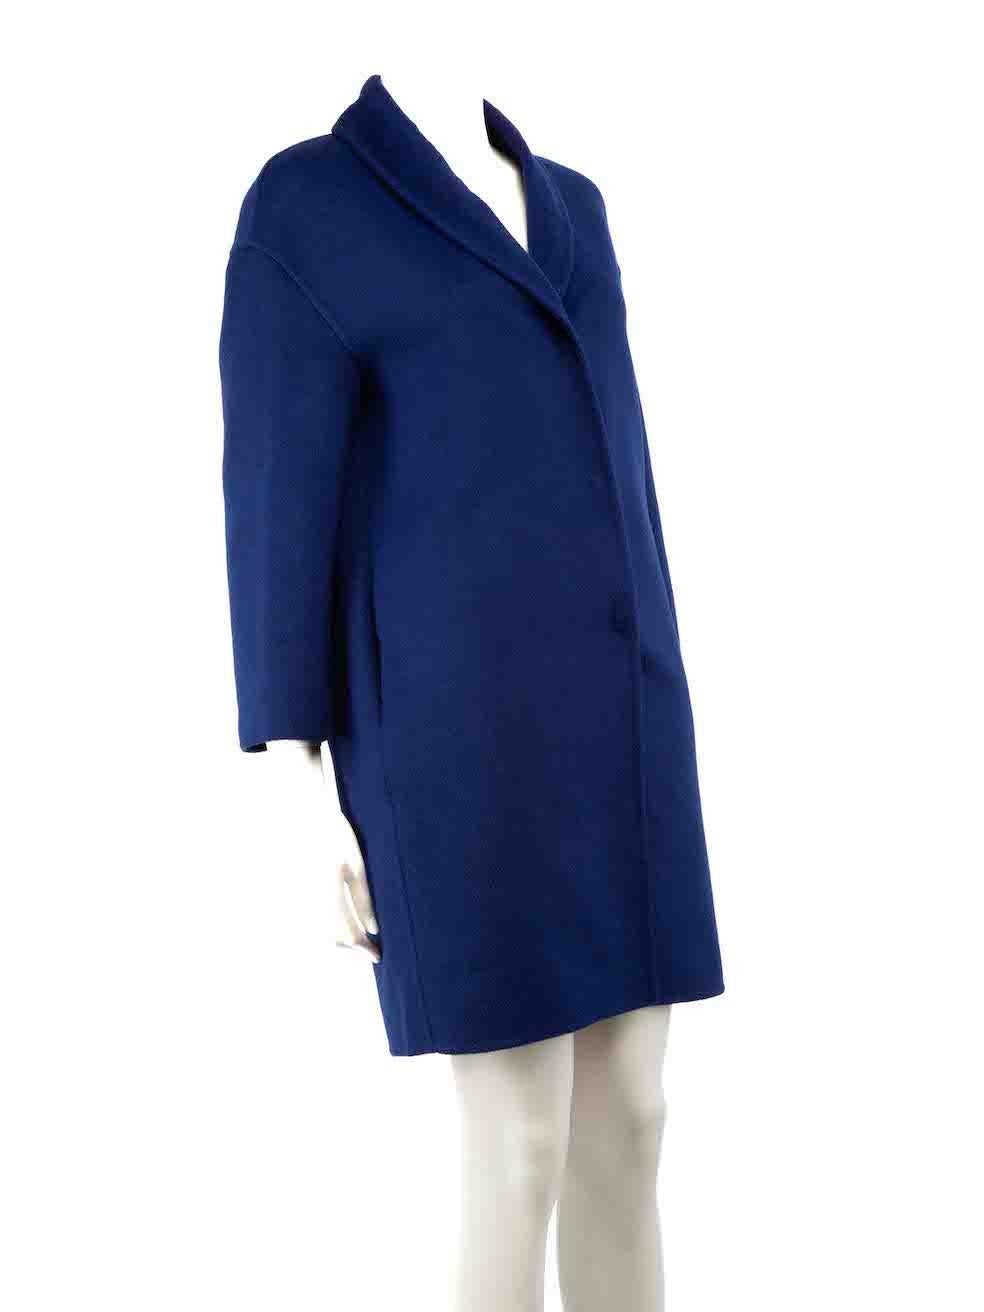 CONDITION is Very good. Minimal wear to coat is evident. Minimal wear to coat is seen with two small discolouration marks on the collar in the front on this used Prada designer resale item.
 
 
 
 Details
 
 
 Blue
 
 Wool
 
 Coat
 
 Single